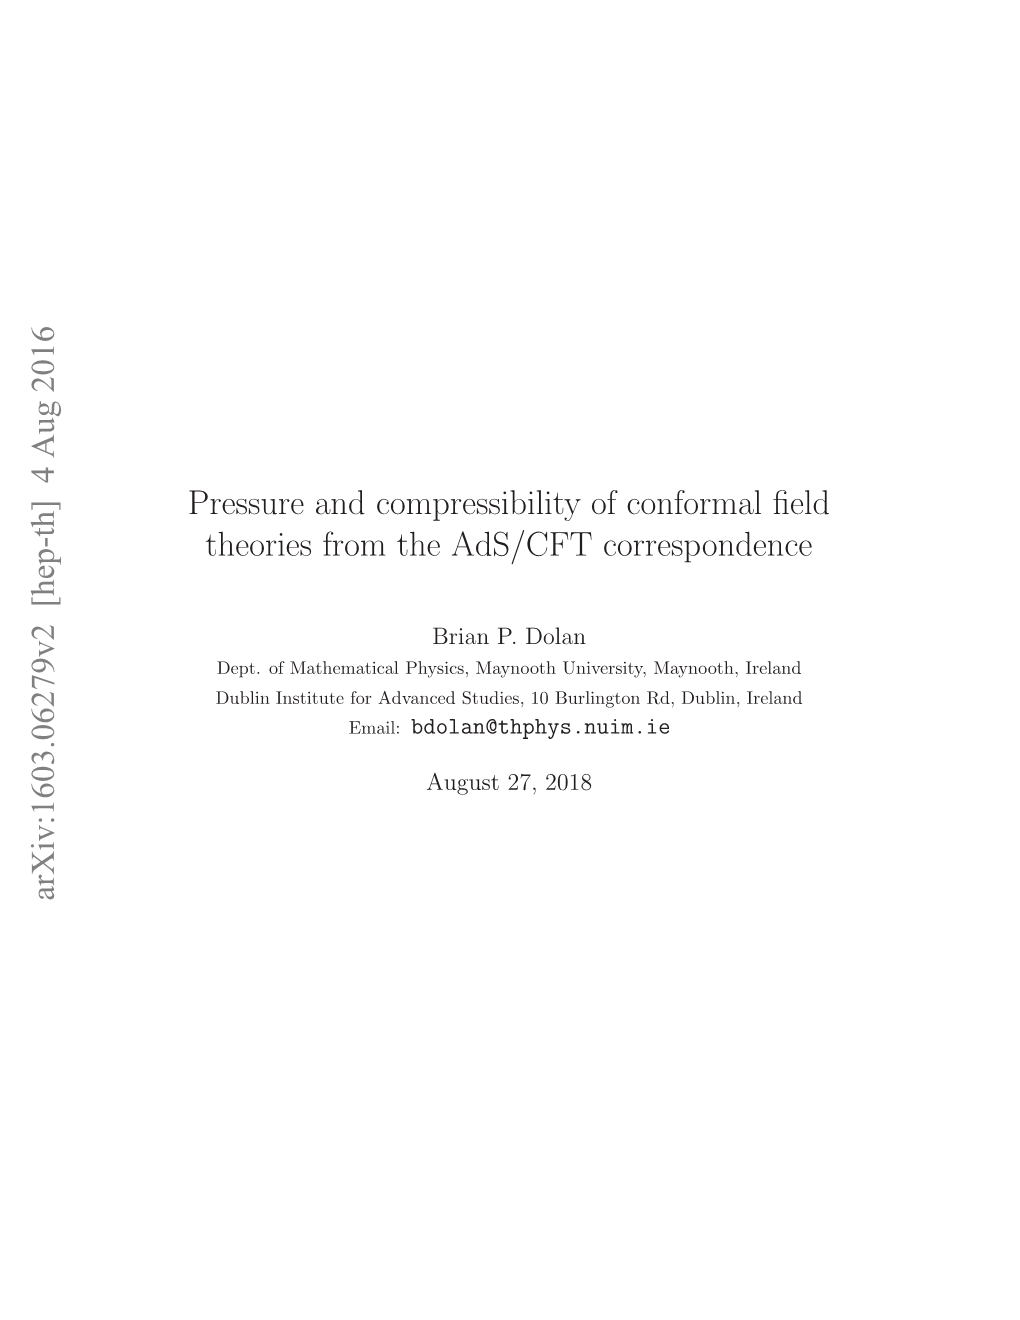 Pressure and Compressibility of Conformal Field Theories From